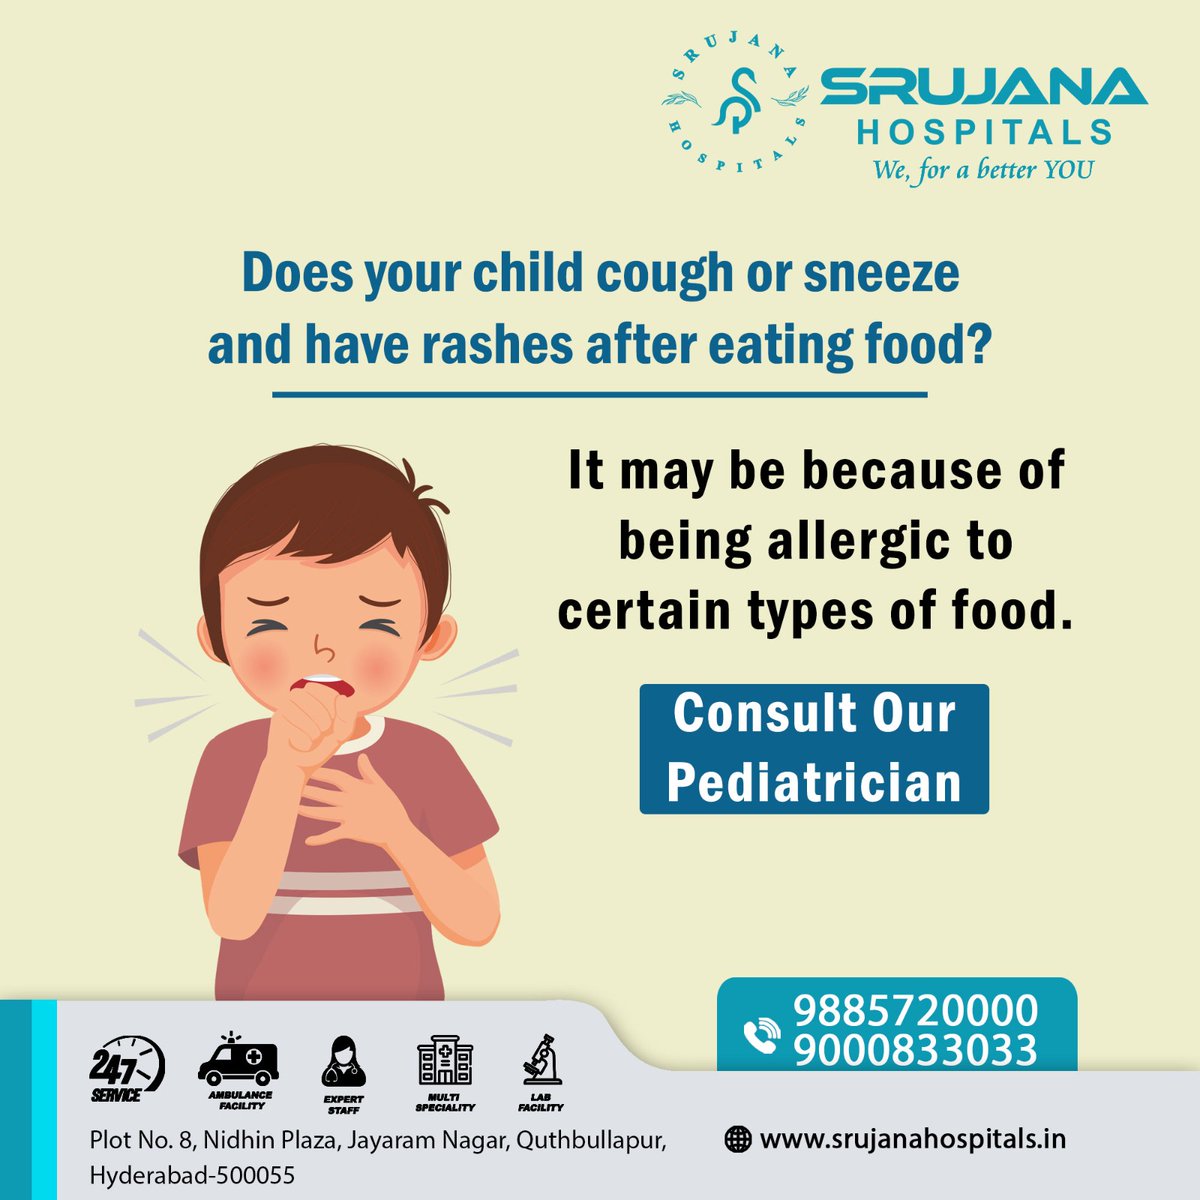 Does your child cough or sneeze and have rashes after eating food? Phone Number : 𝟗𝟖𝟖𝟓𝟕𝟐𝟎𝟎𝟎𝟎/𝟗𝟎𝟎𝟎𝟖𝟑𝟑𝟎𝟑𝟑 #Pediatrician #Allergic #AllergyFoods #BestPediatrician #BestHospitalNearMe #SrujanaHospitals